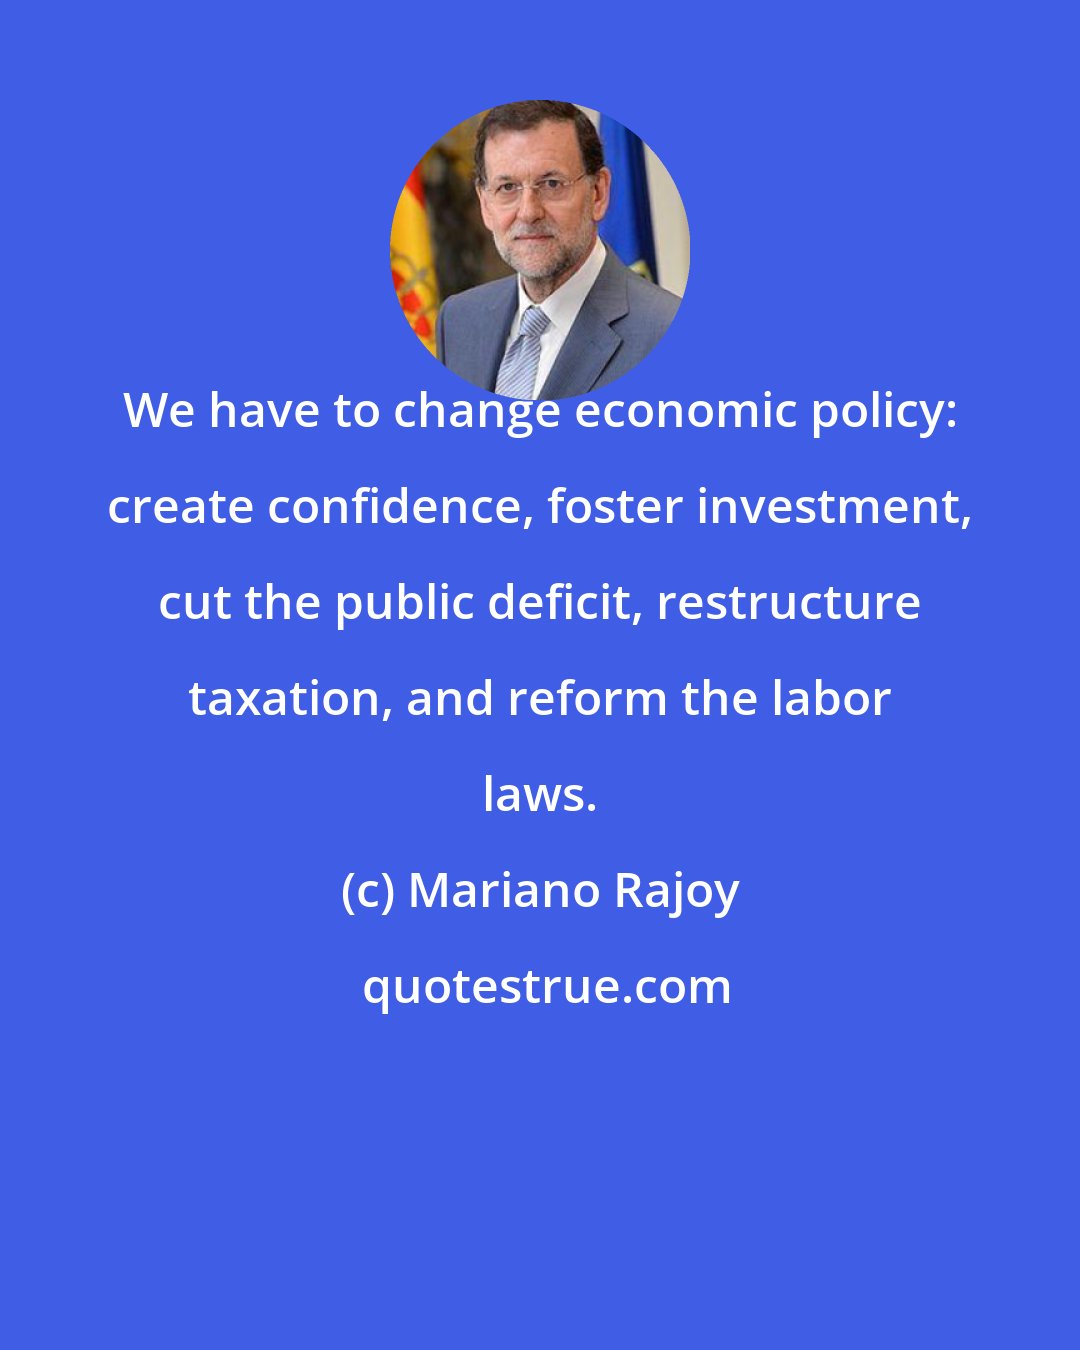 Mariano Rajoy: We have to change economic policy: create confidence, foster investment, cut the public deficit, restructure taxation, and reform the labor laws.